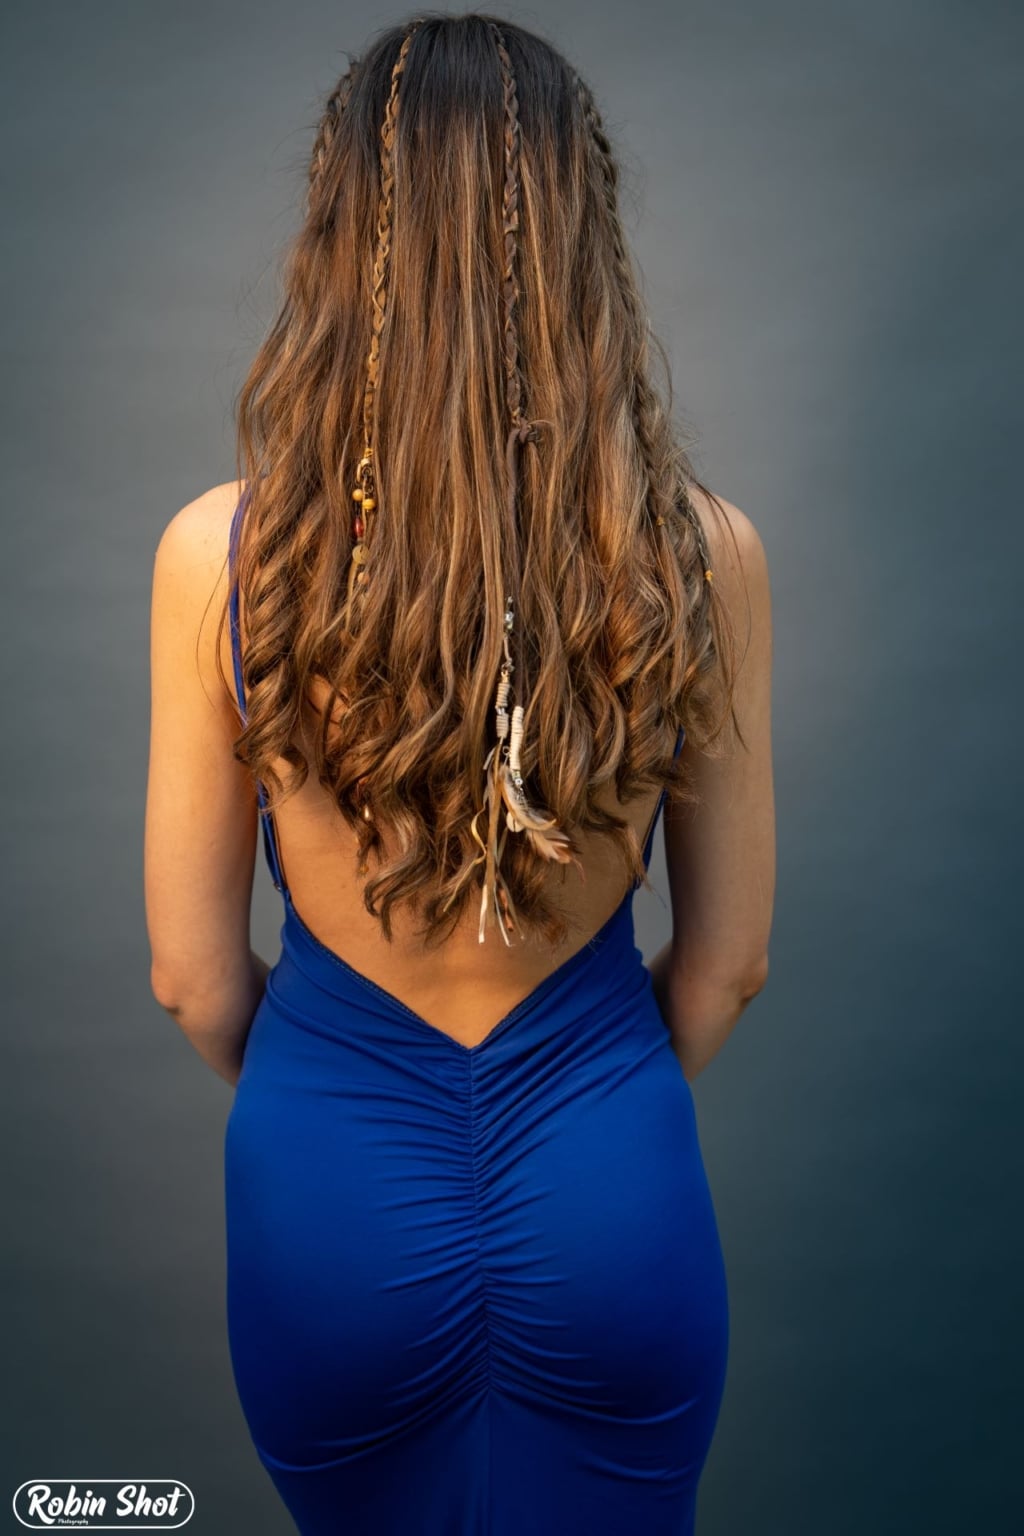 Woman with long brown hair wears Hairdreams Leather Ribbons in her hairstyle